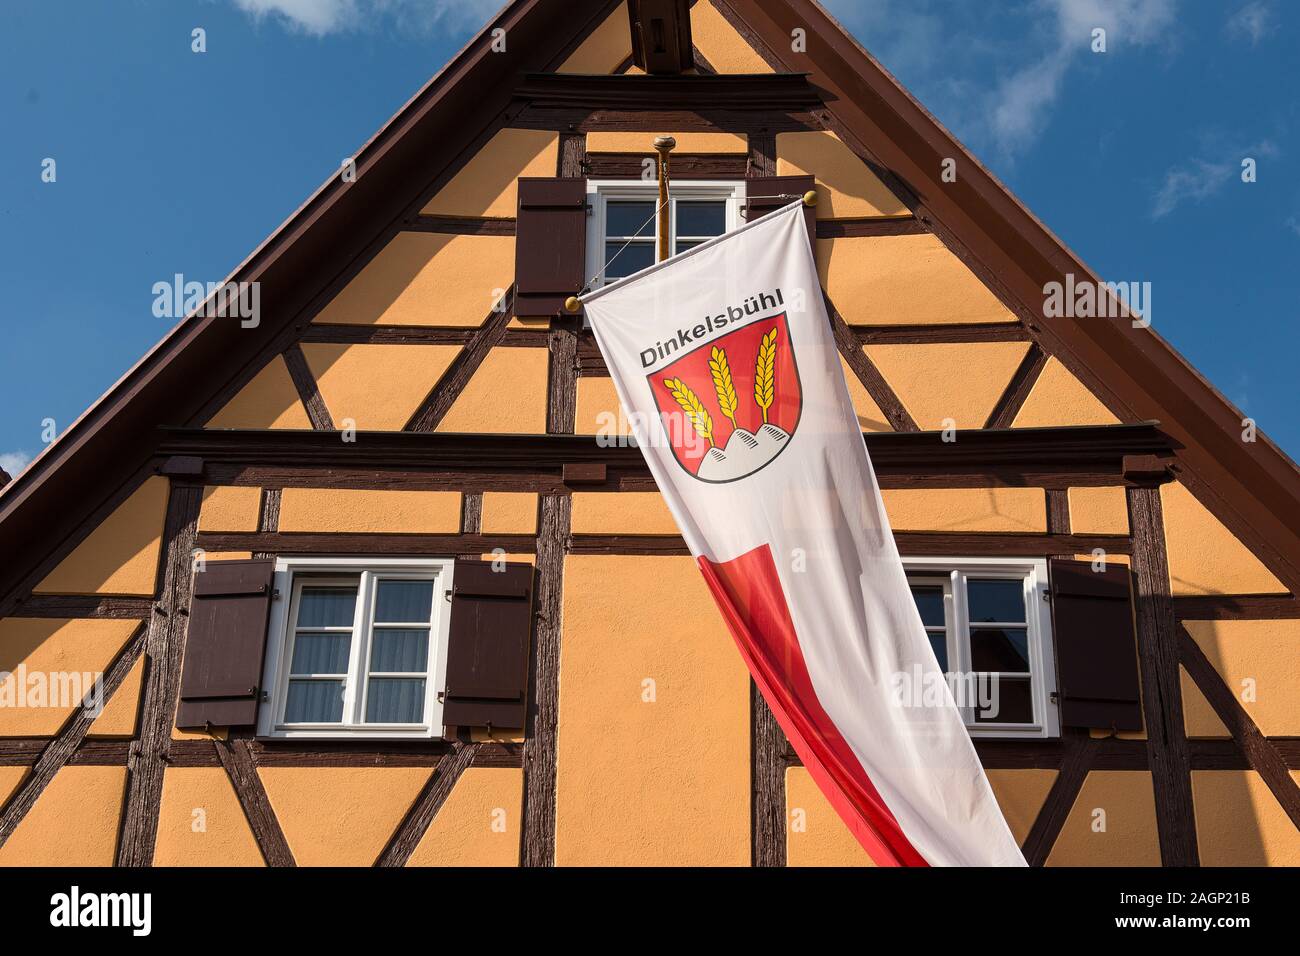 Dinkelsbühl, Germany - July 15, 2019; Old half timbered house with the flag of Dinkelsbühl a populair touristic city in Bavaria Stock Photo